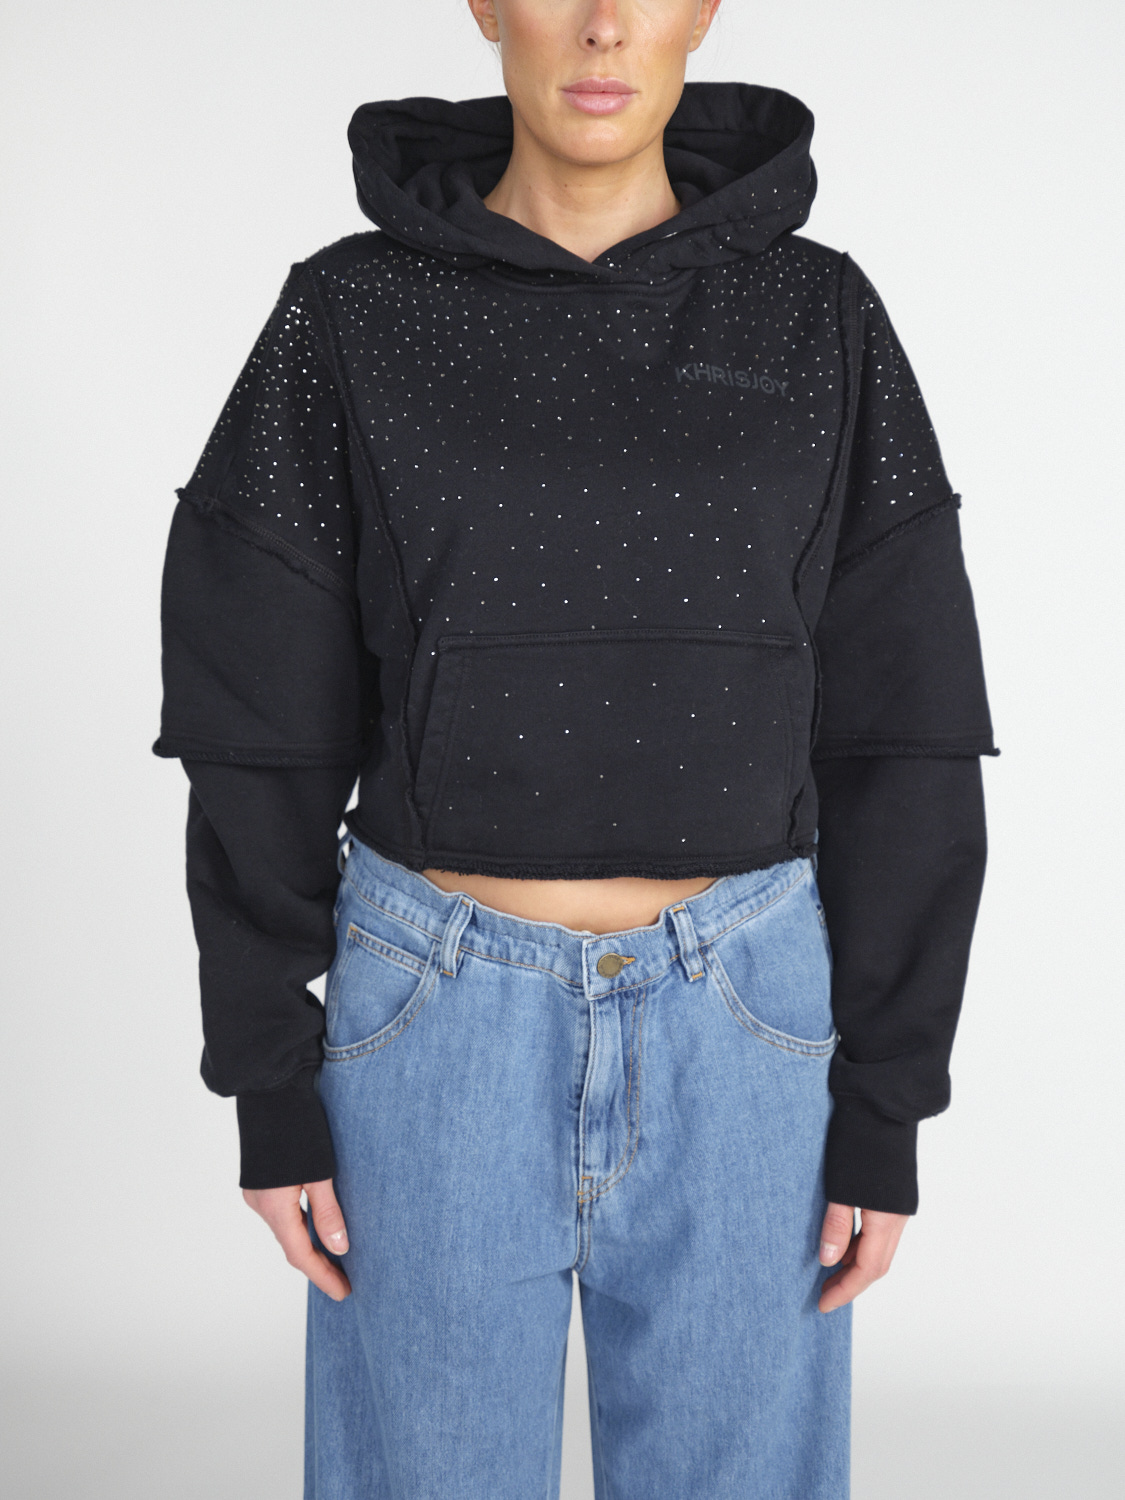 khrisjoy Hoodie Crop - Cropped sweater with glitter details   black XS/S